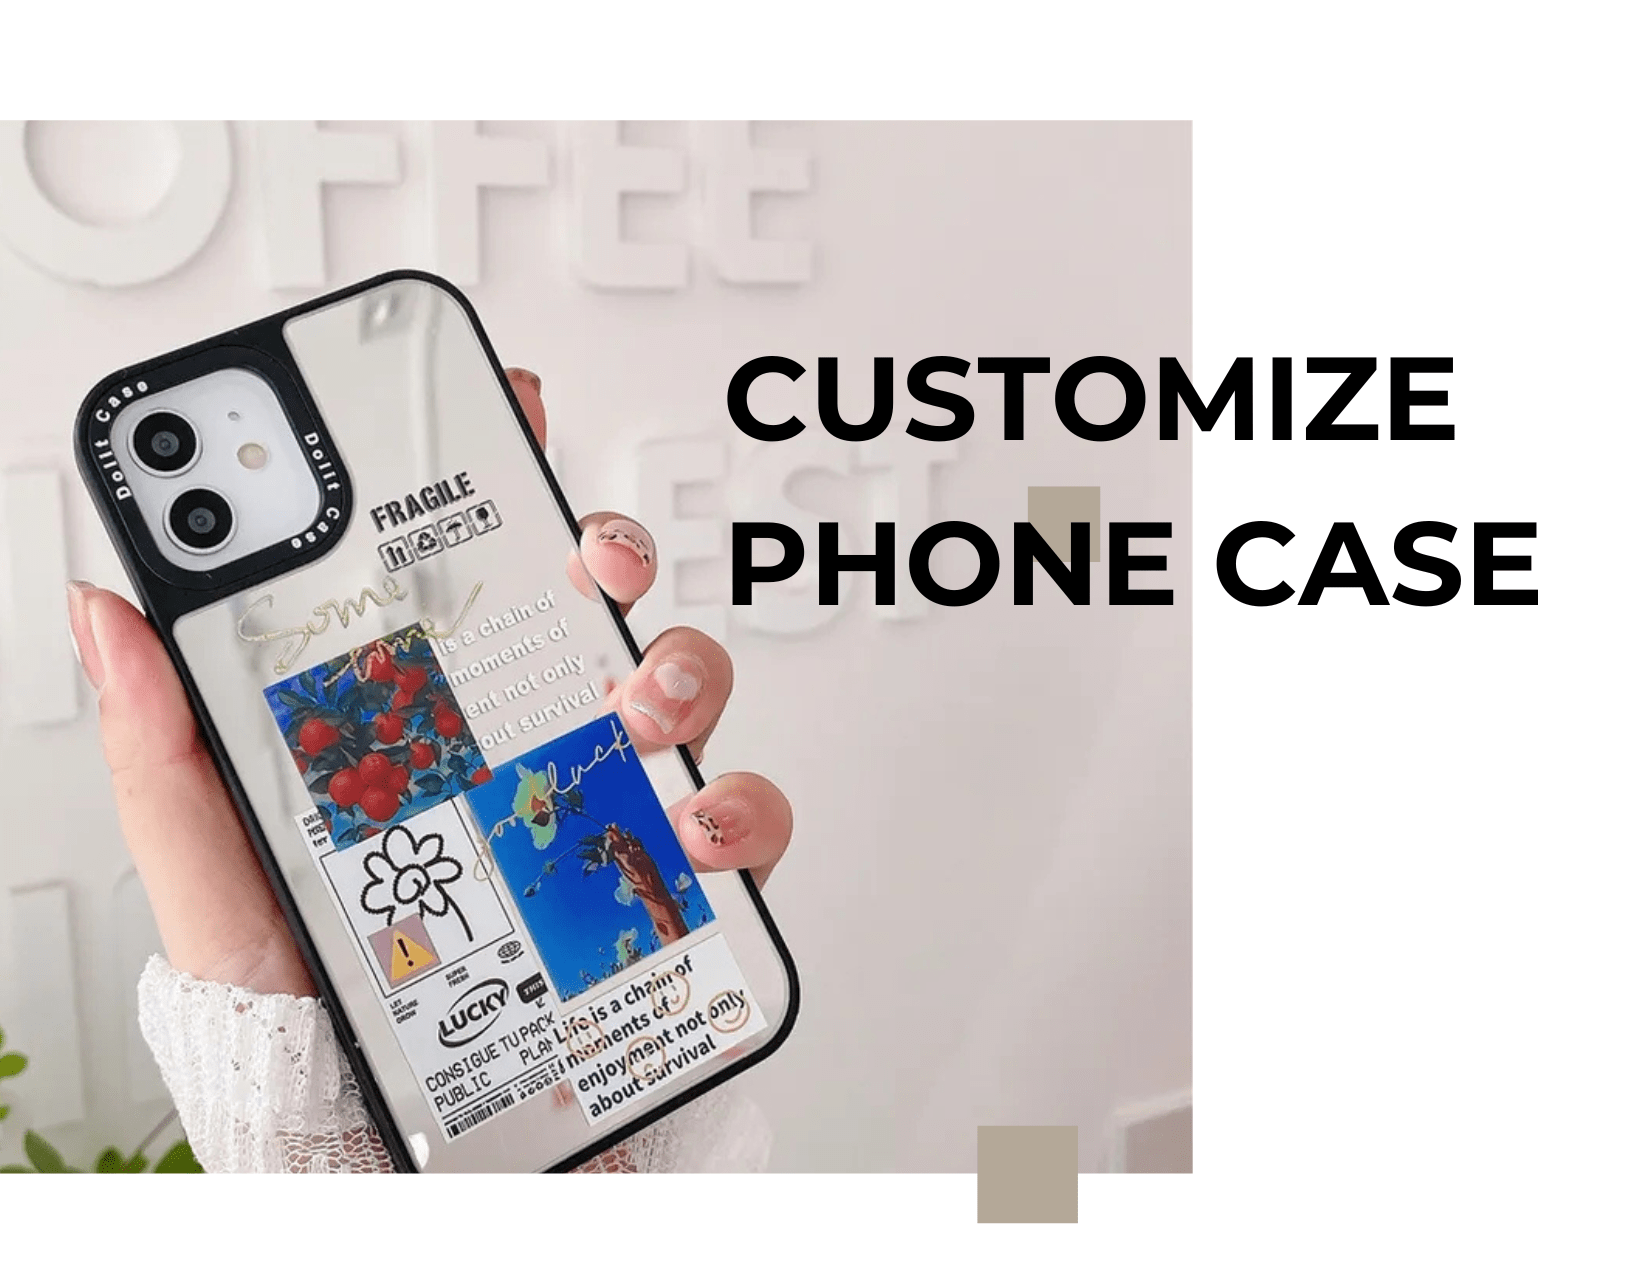 How to customize a phone case